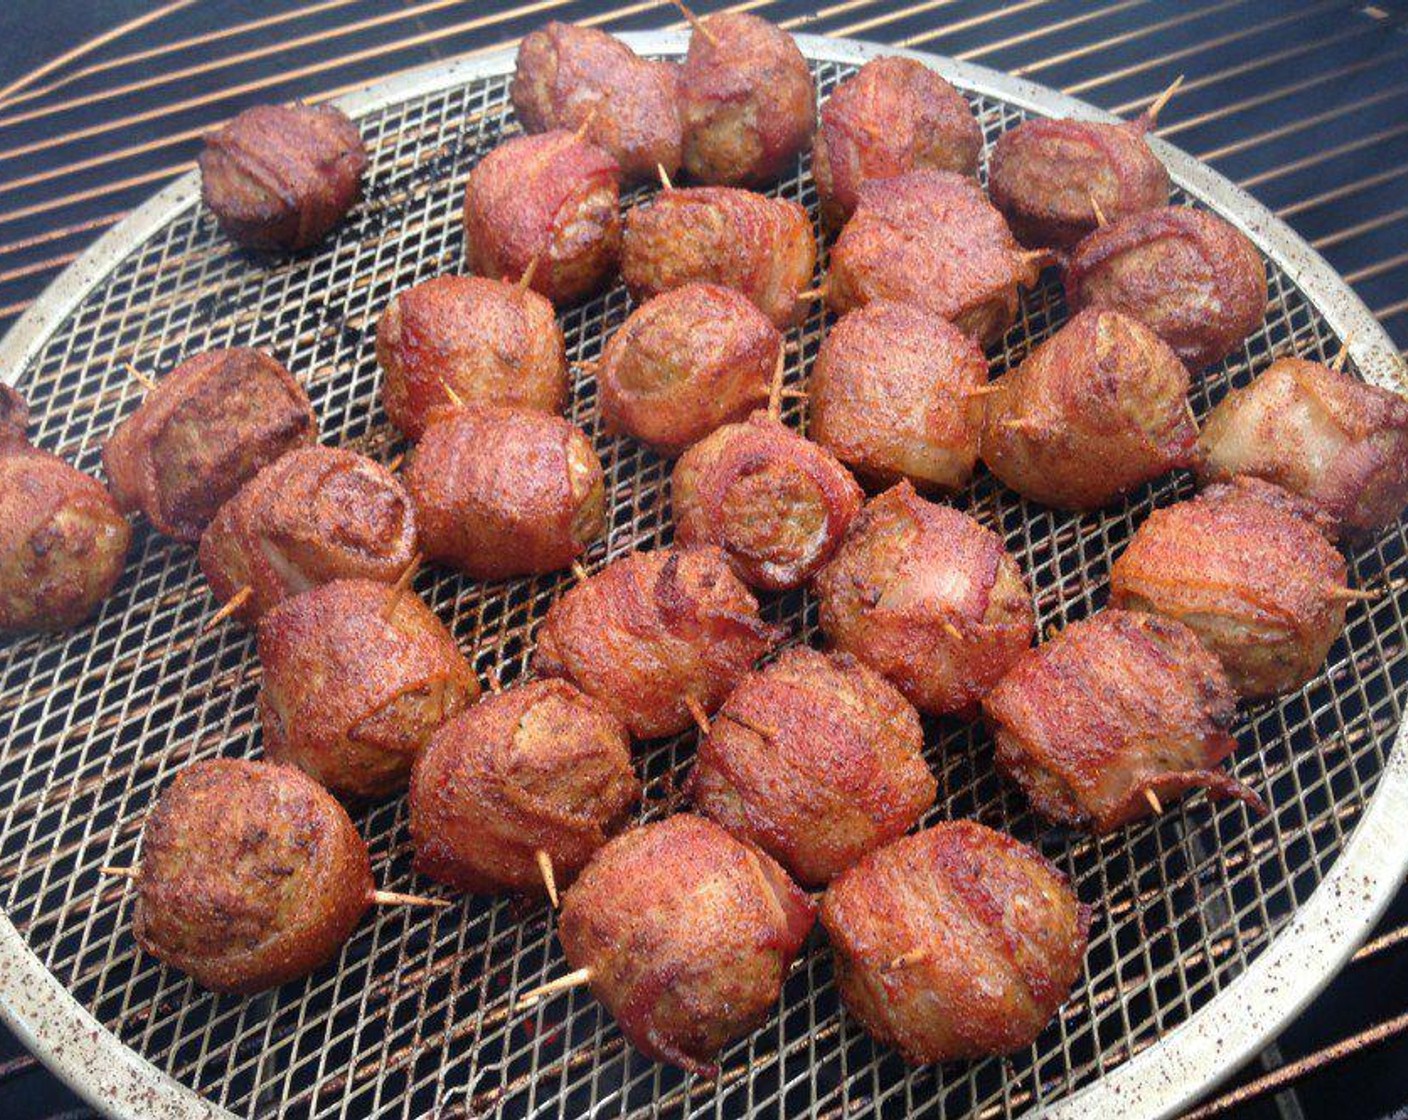 step 3 Get your smoker or grill set at 275 degrees F (140 degrees C) and place these bacon-wrapped meatballs on the cooker. Cook until the bacon has a great, mahogany color, about 1 – 1.5 hours. Check them after 45 minutes to keep an eye on the color and turn them if needed.